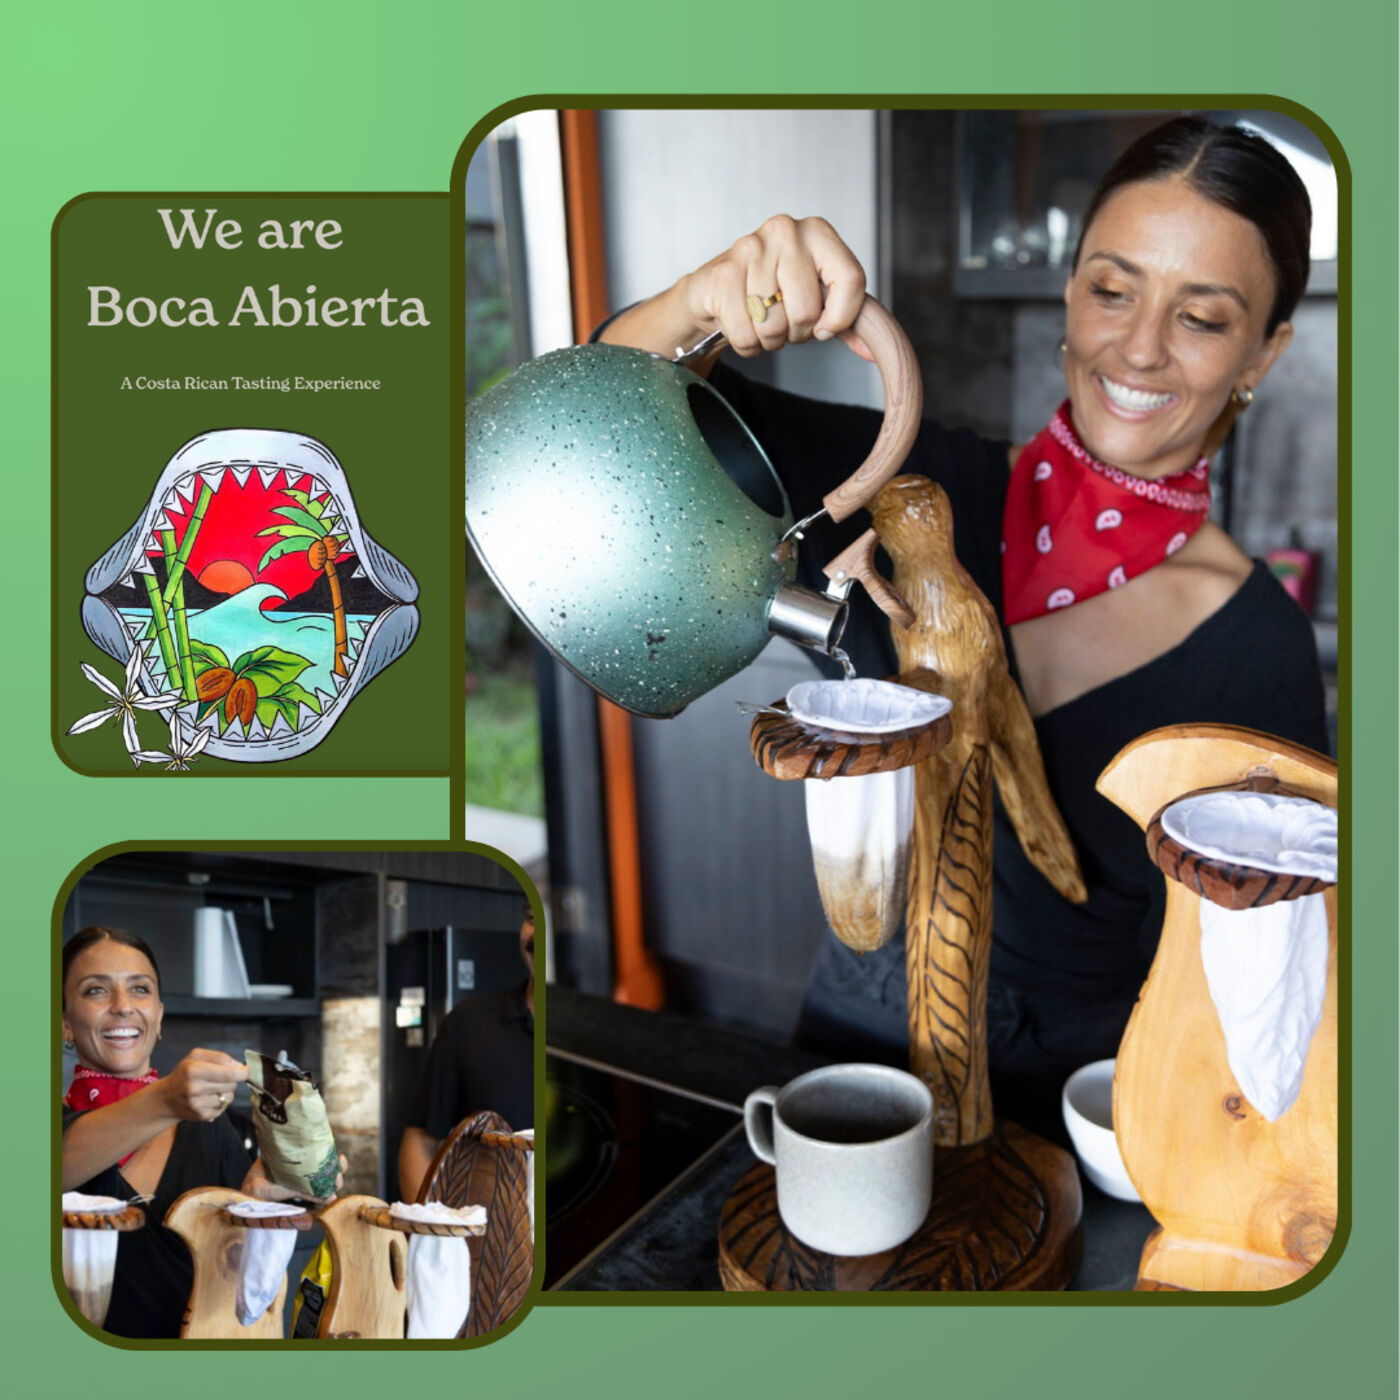 From Bean to Business: Building Boca Abierta (P2)